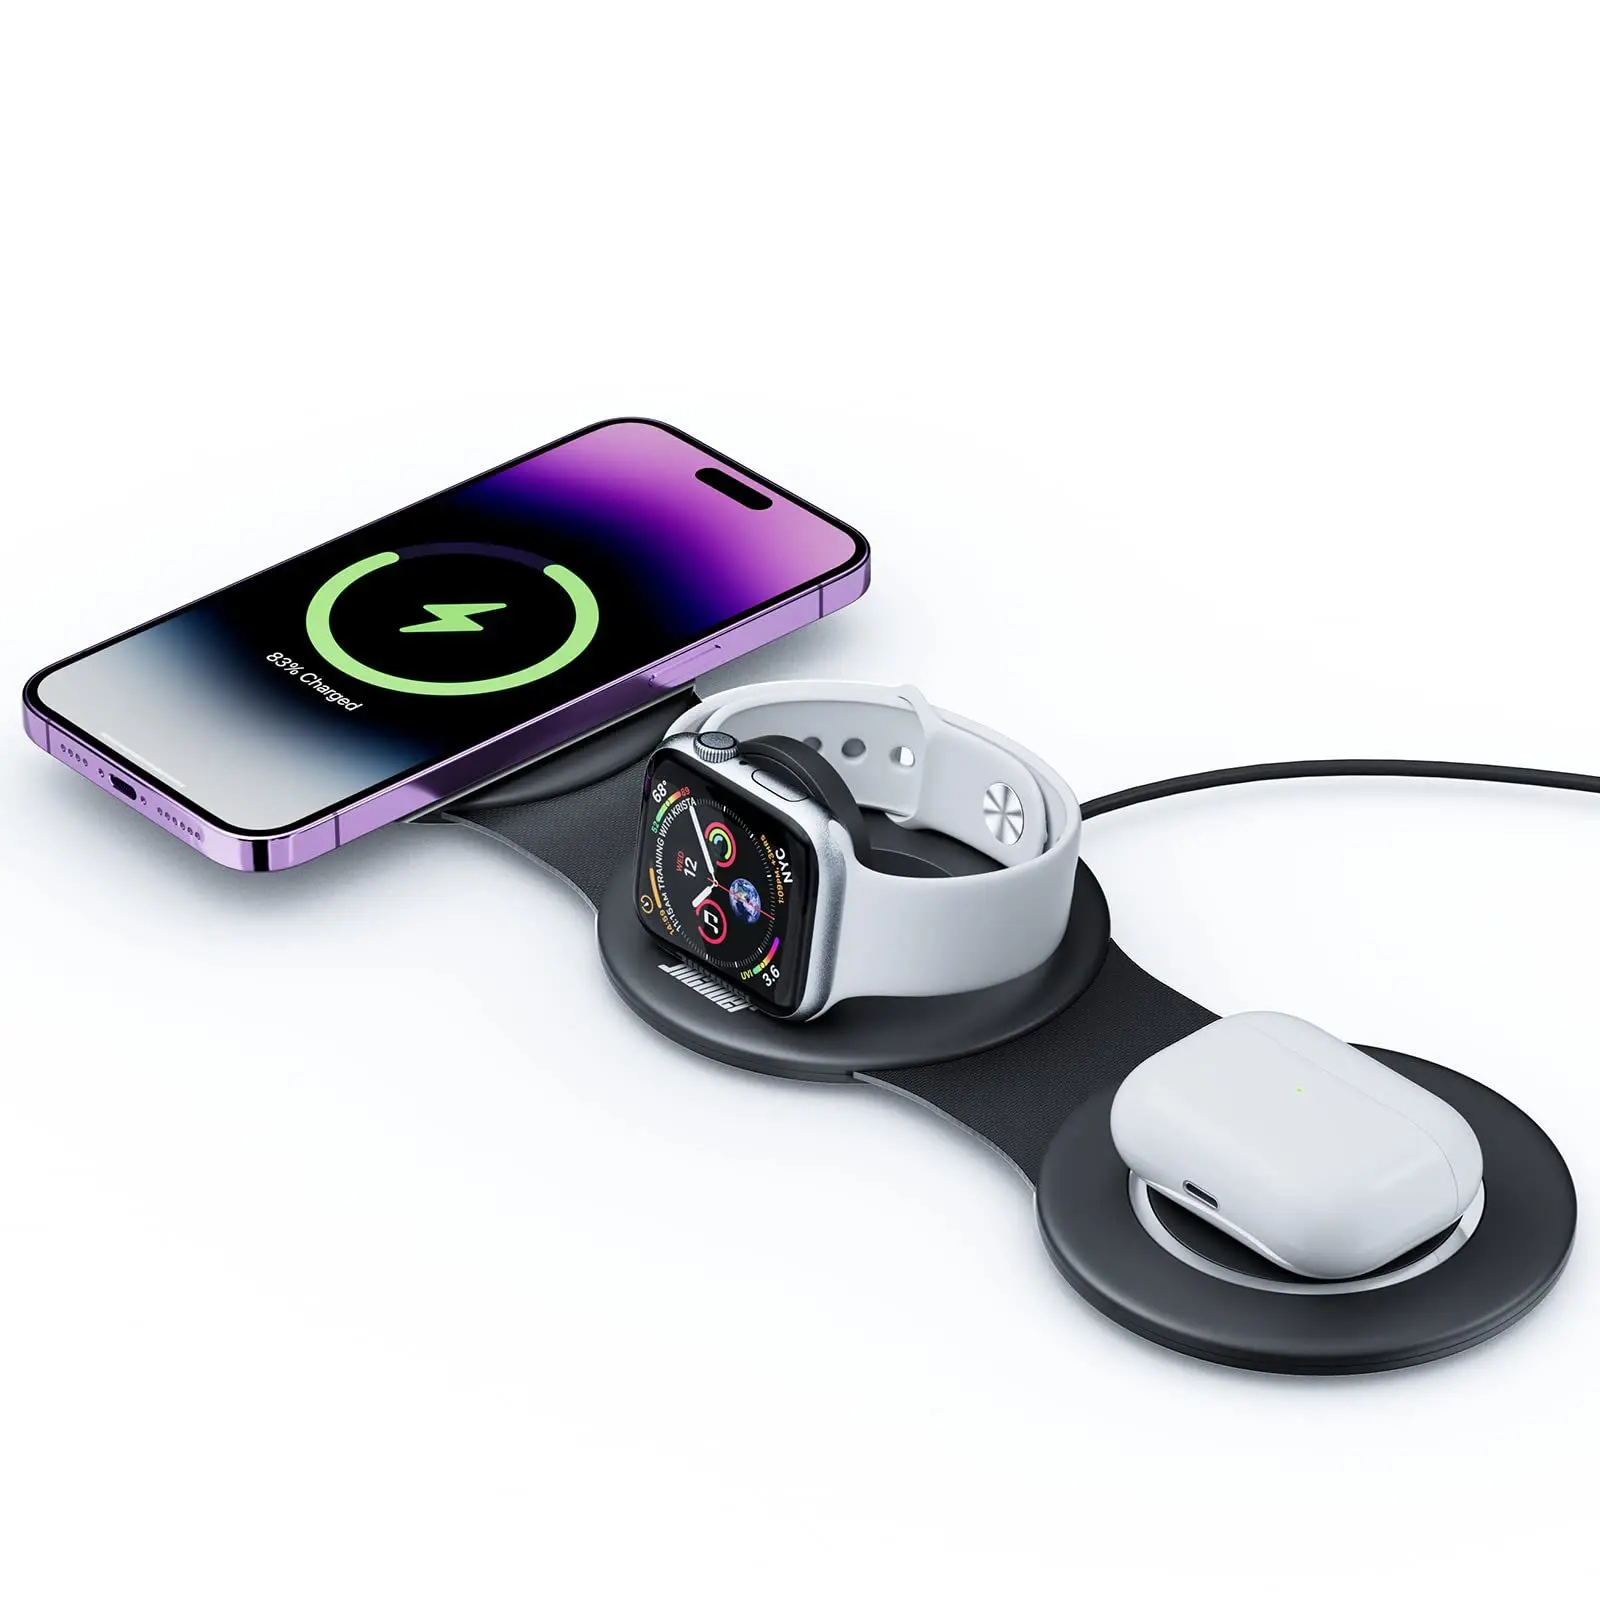 Three In One Wireless Foldable Magnet 15W, Fast Wireless Charging Pad, Travel Charger for Multiple Devices, Foldable 3 in 1 Wireless Charging Station